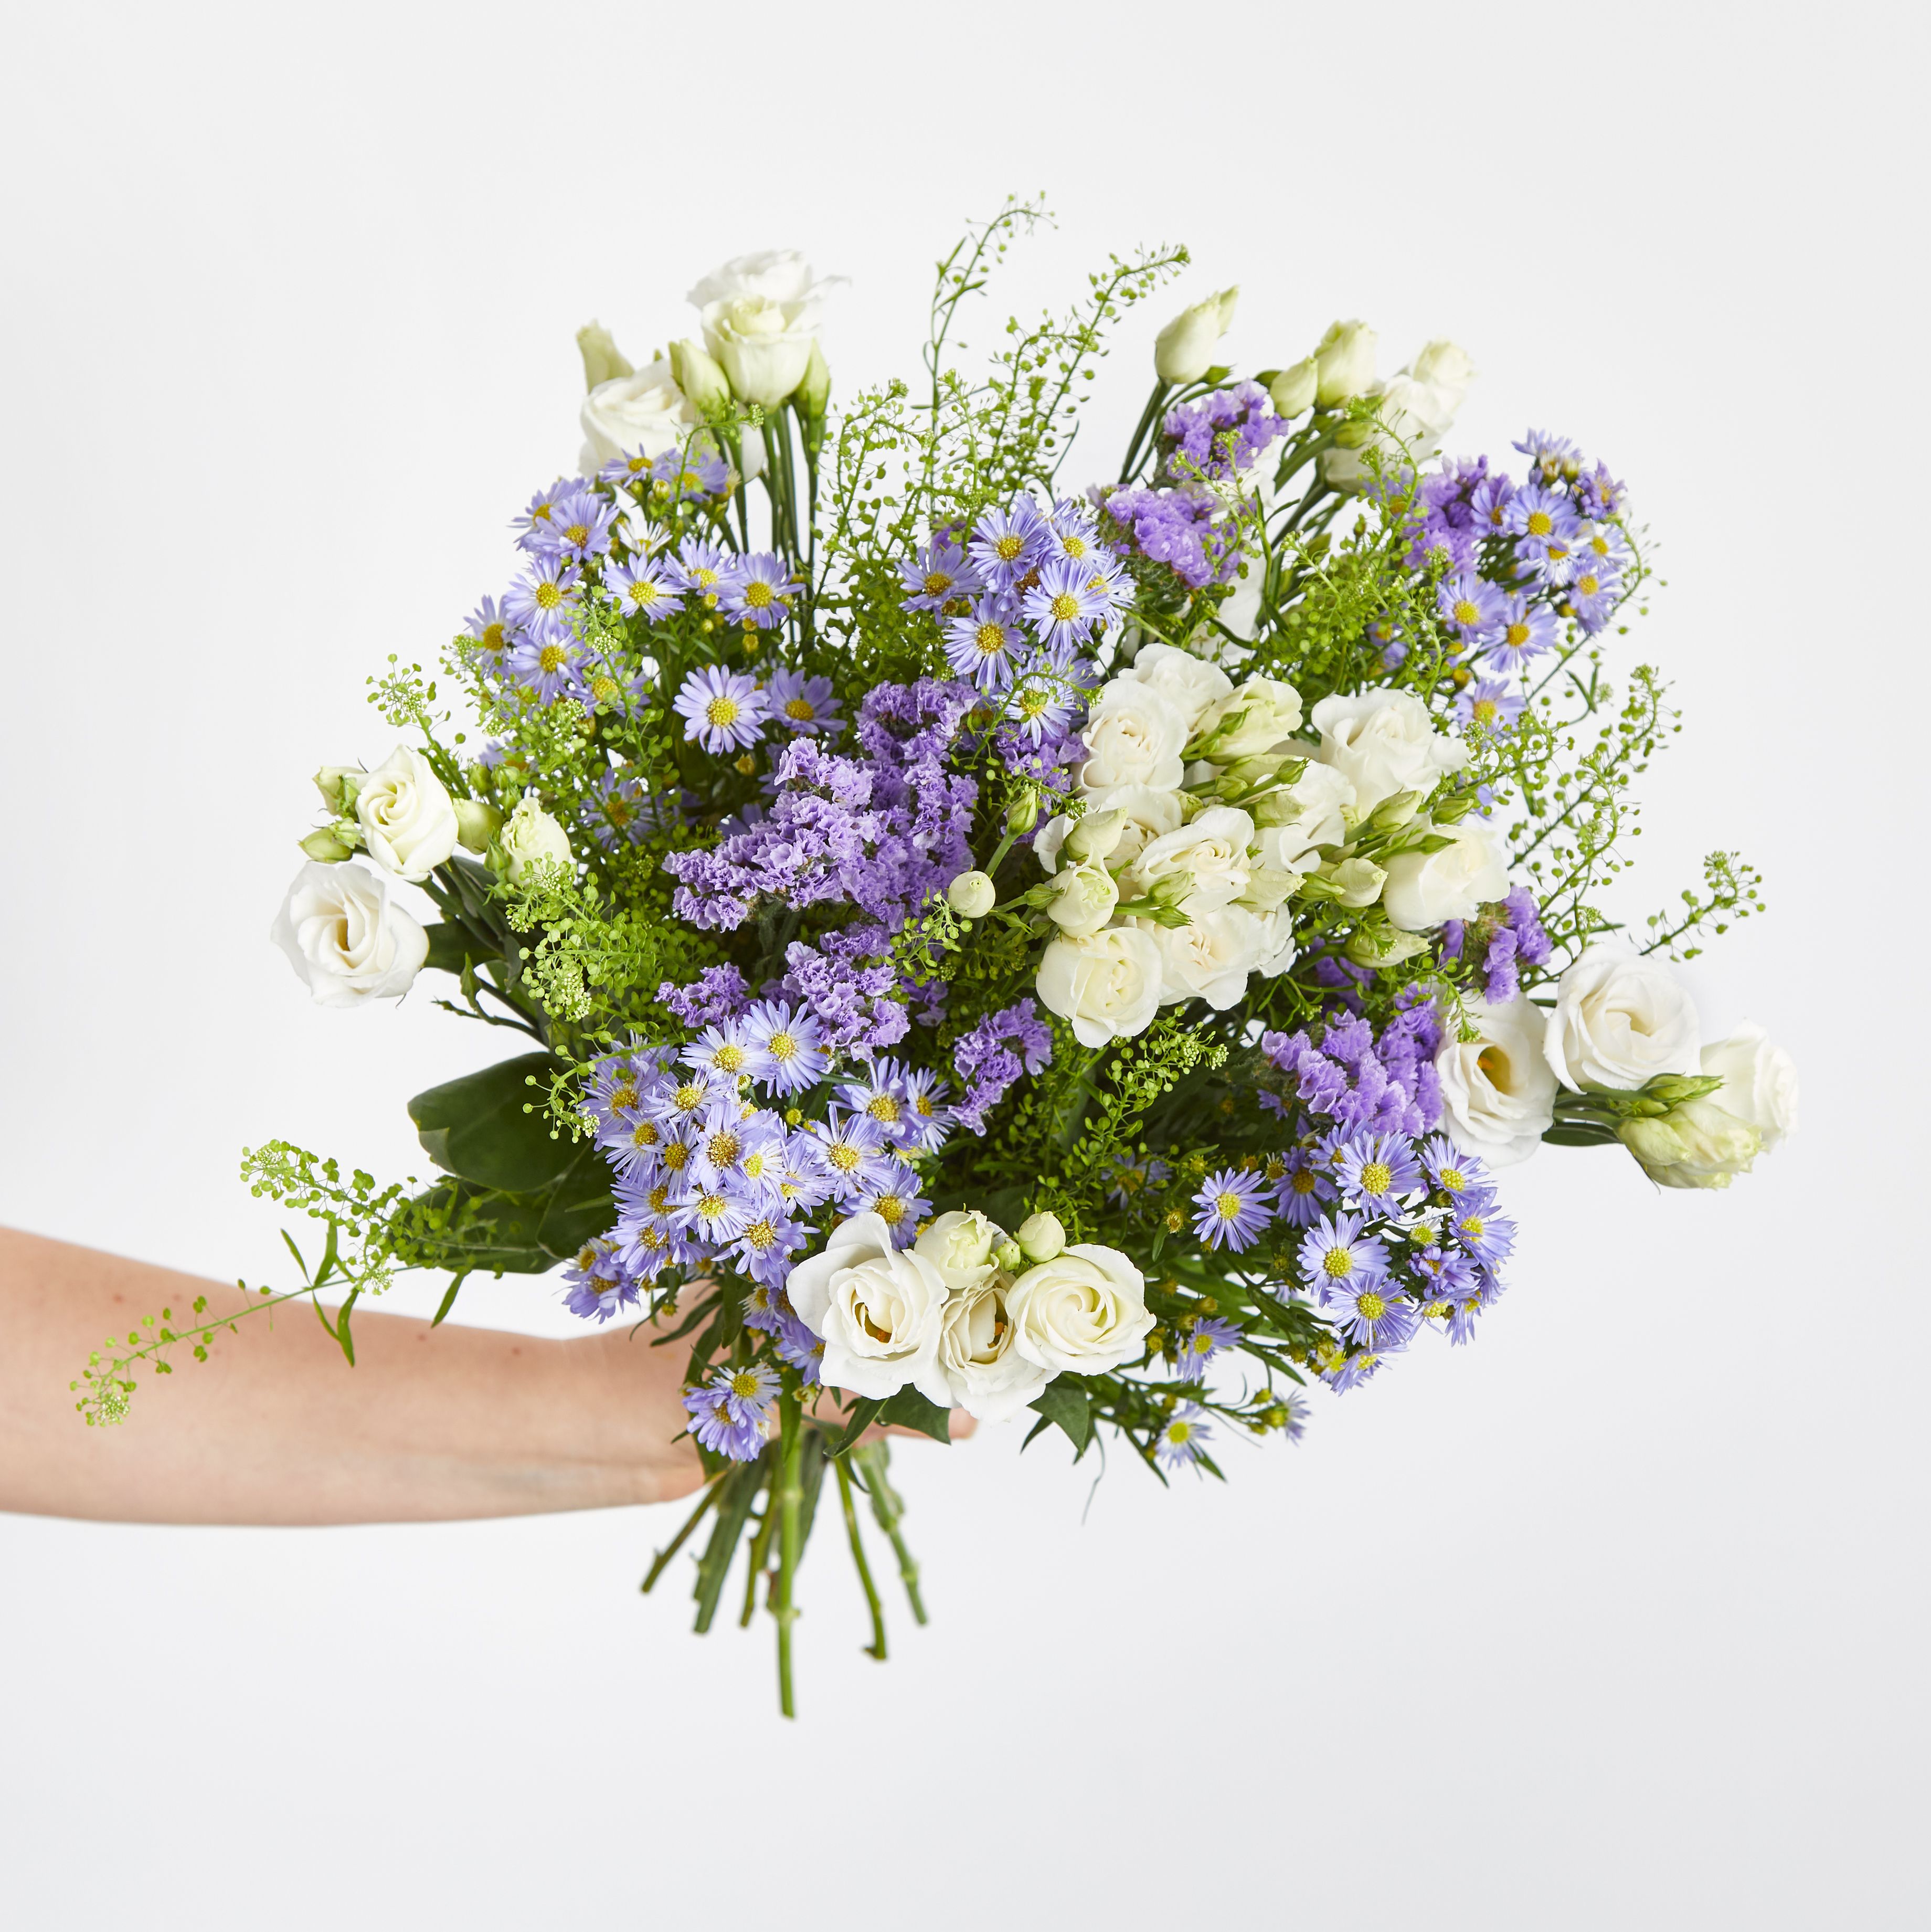 W16 Pet_Lisianthus, asters, statice and greenbell.jpeg